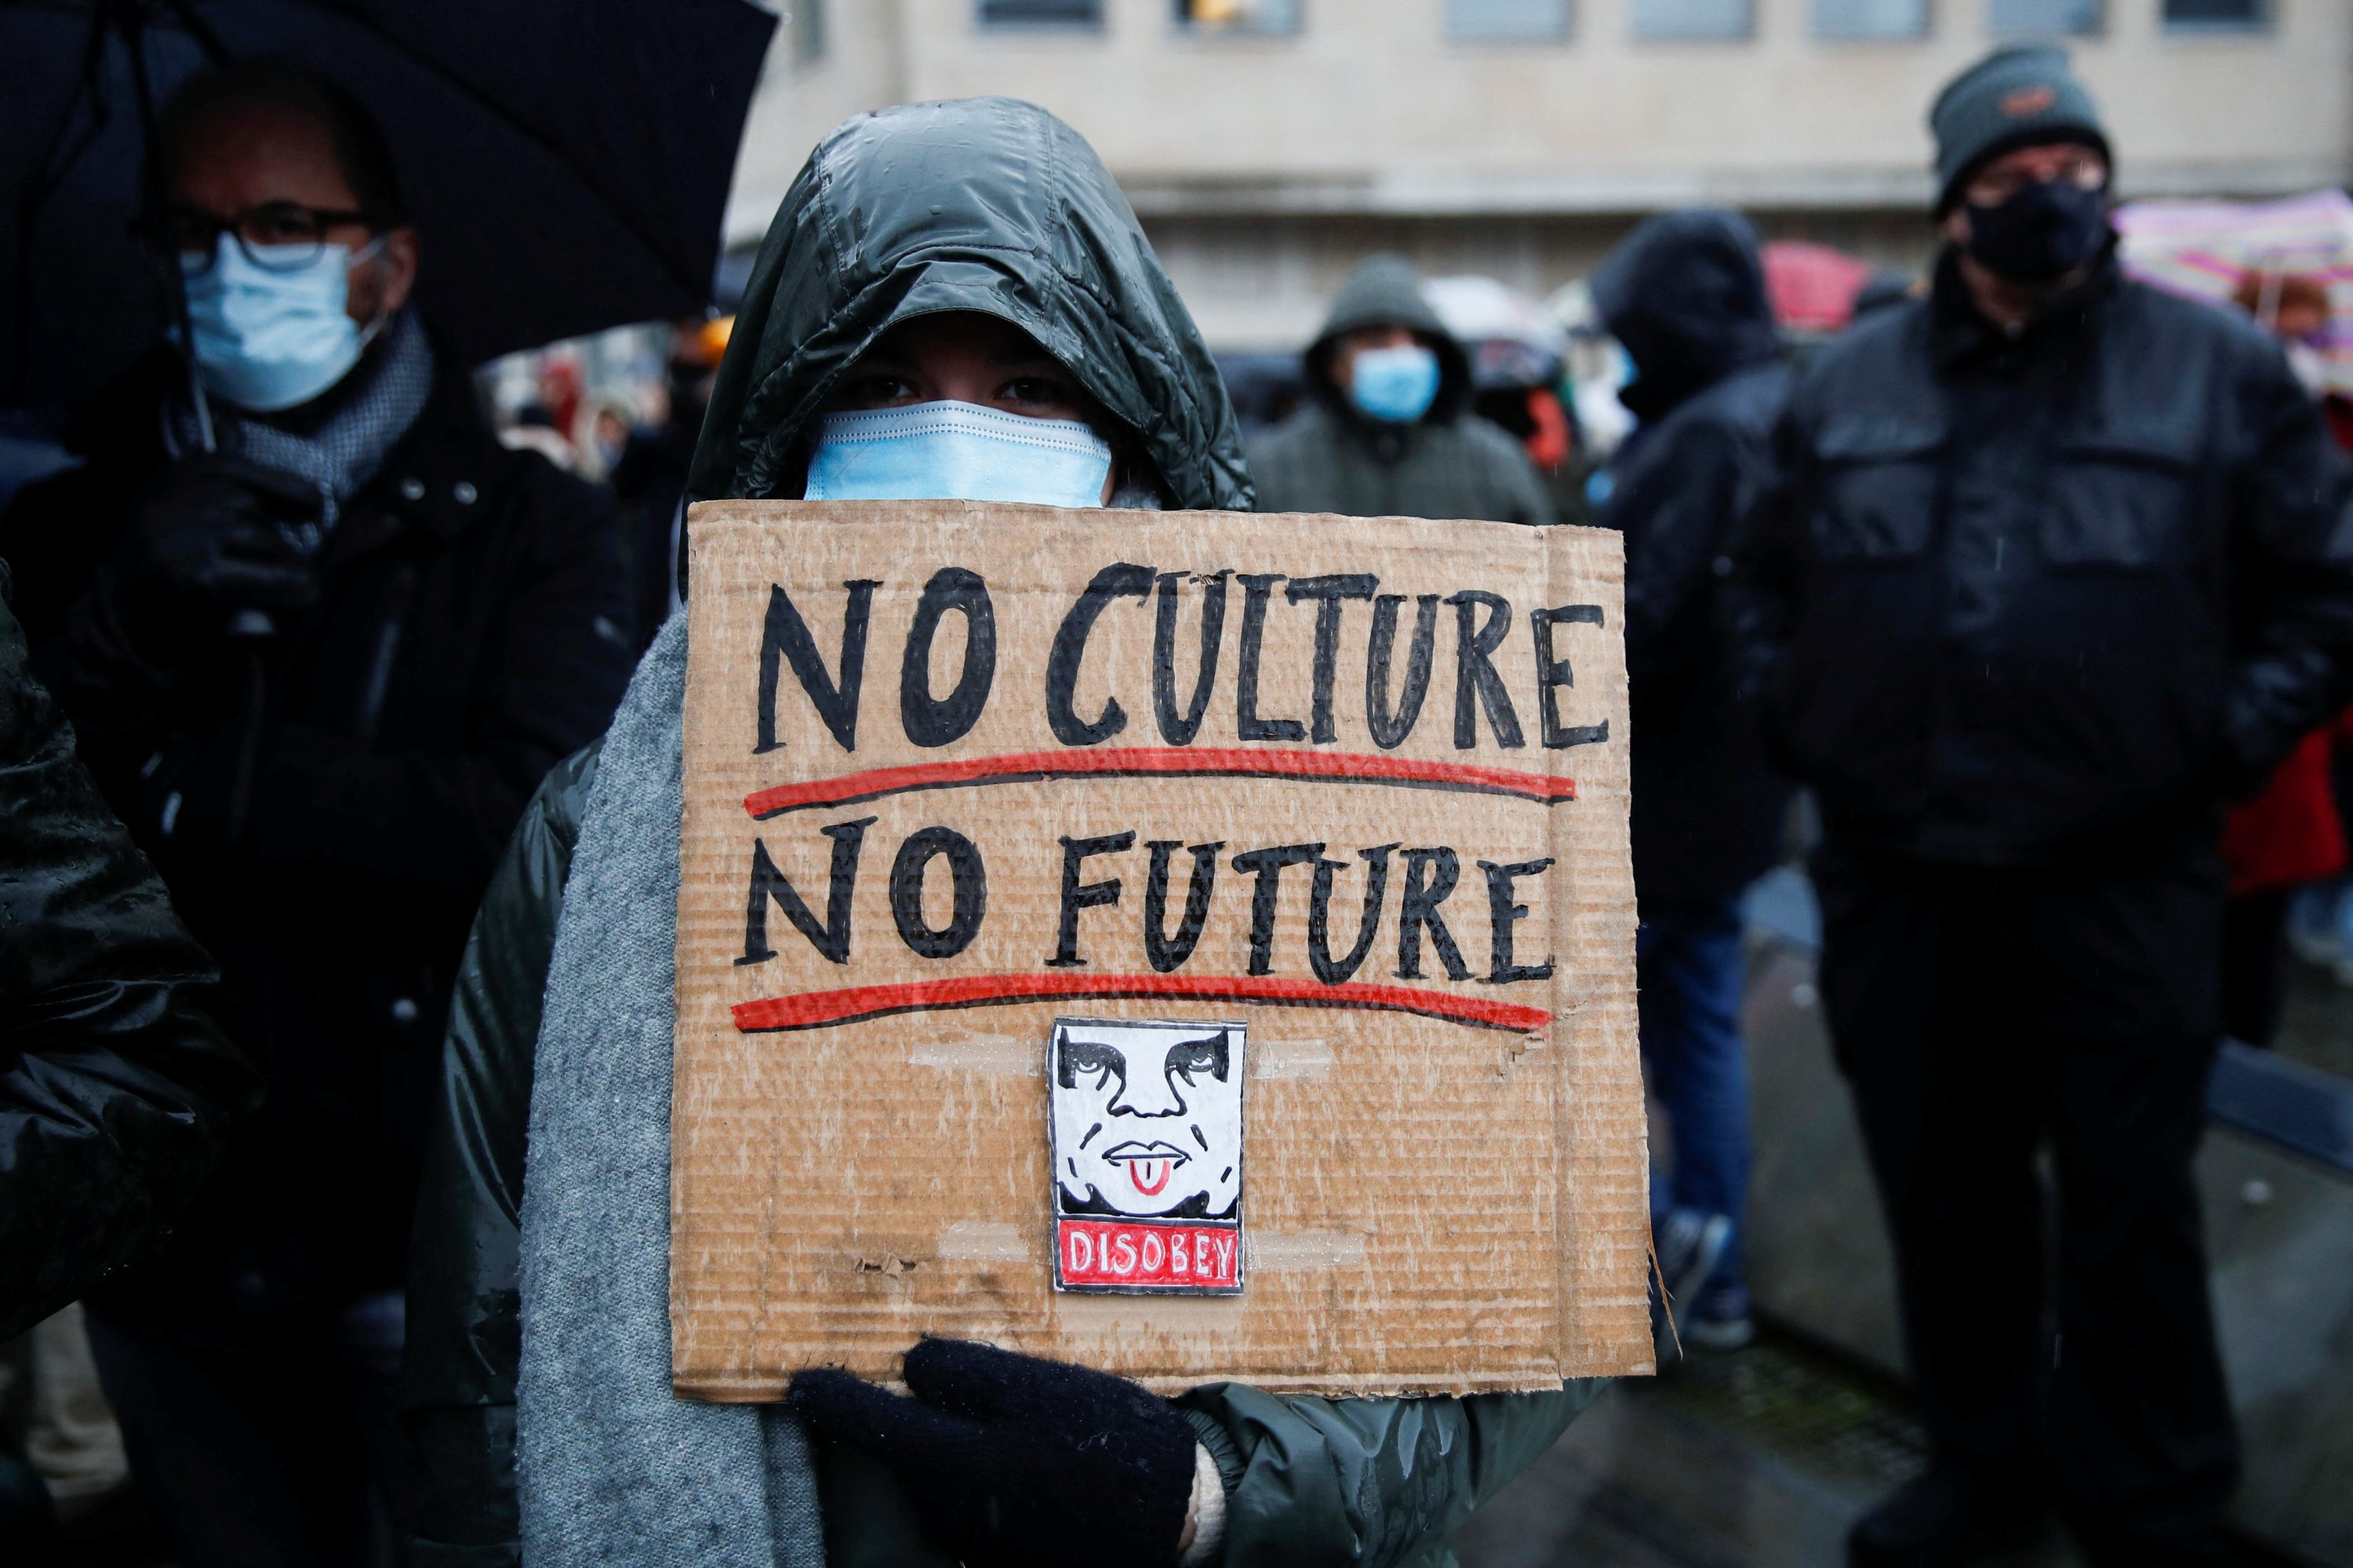 A woman holds a banner reading 'No Culture, No Future' during a demonstration against the Belgian government's restrictions imposed to contain the spread of COVID-19 in Brussels, Belgium, Dec. 26, 2021. REUTERS/Johanna Geron